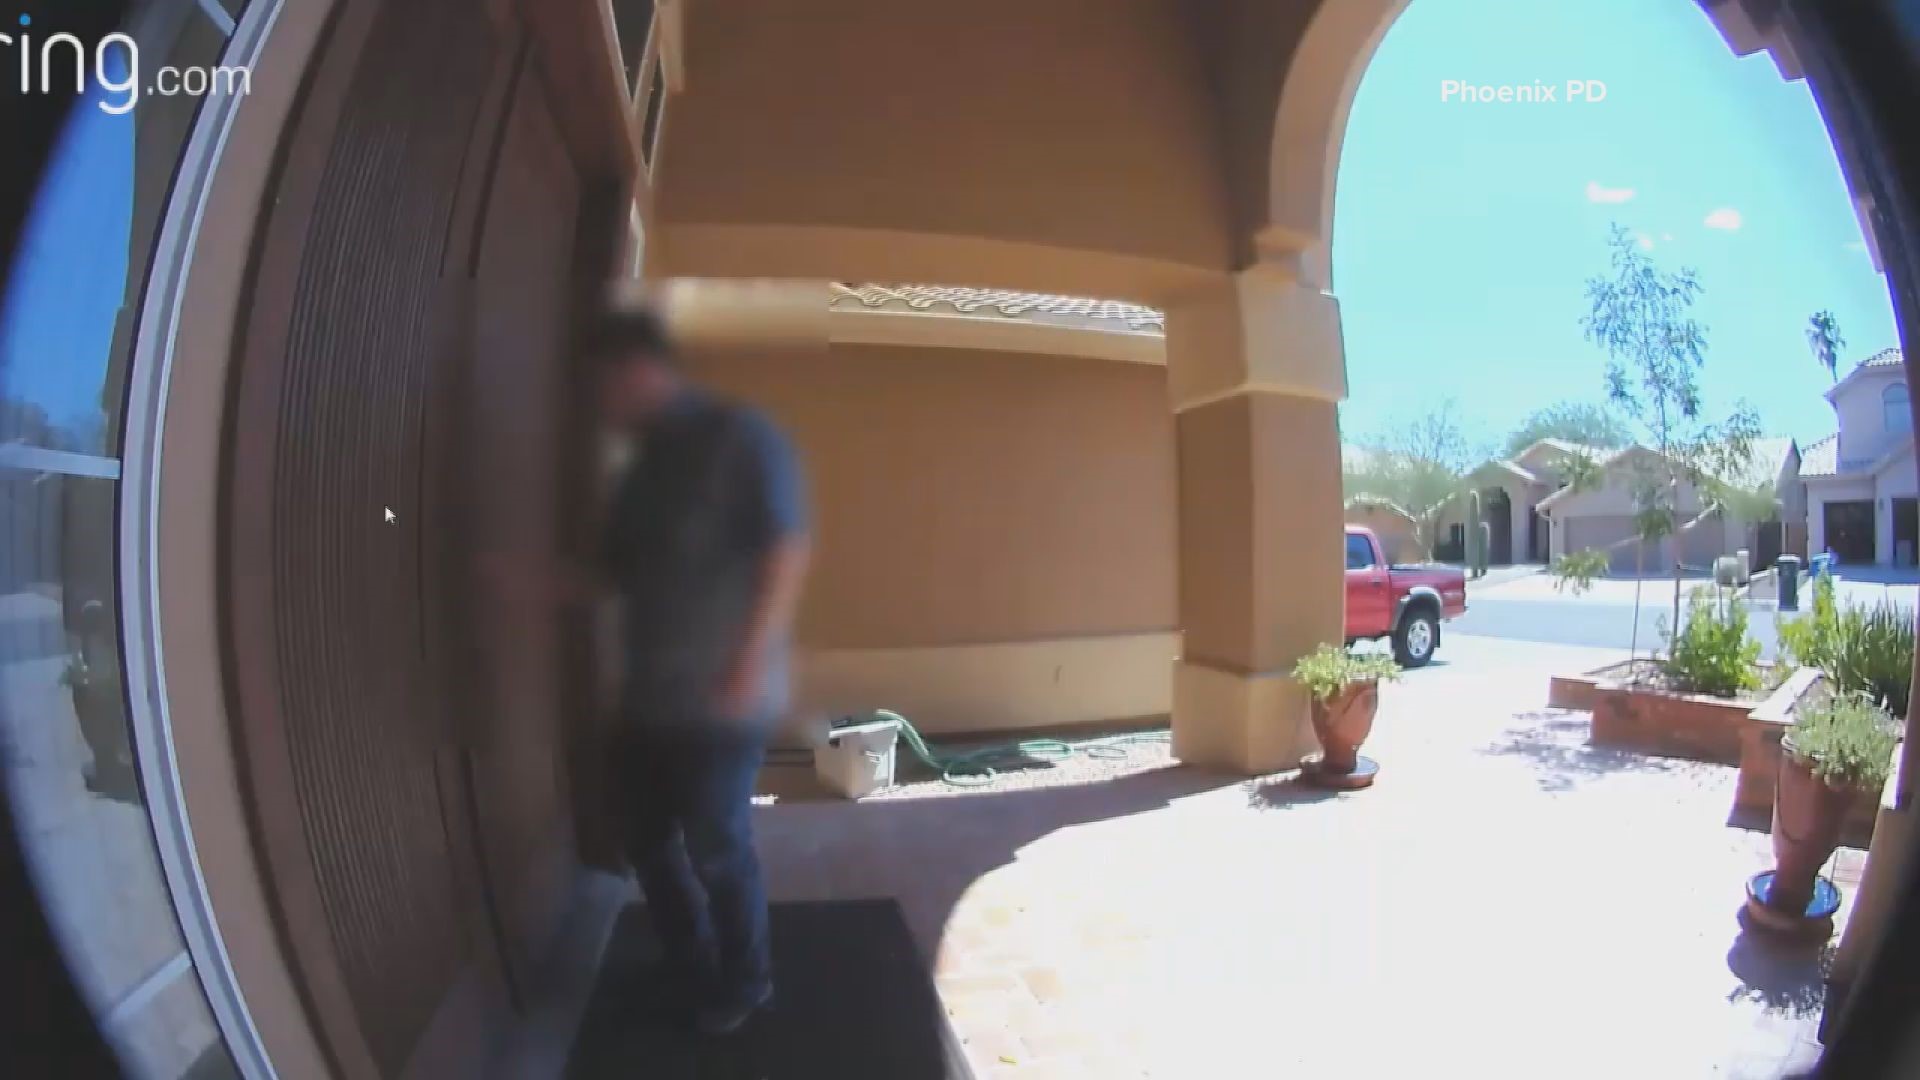 Phoenix PD has released video from a doorbell camera that shows a teen arrives home around 3:00 pm on Tuesday. Moments later a suspicious vehicle and person arrive at the home on South 20th Place in Phoenix. The person exits a red pickup truck and walks to the front door where he tries to open the door without knocking or ringing the doorbell. The teen called his parents who then checked the doorbell camera.